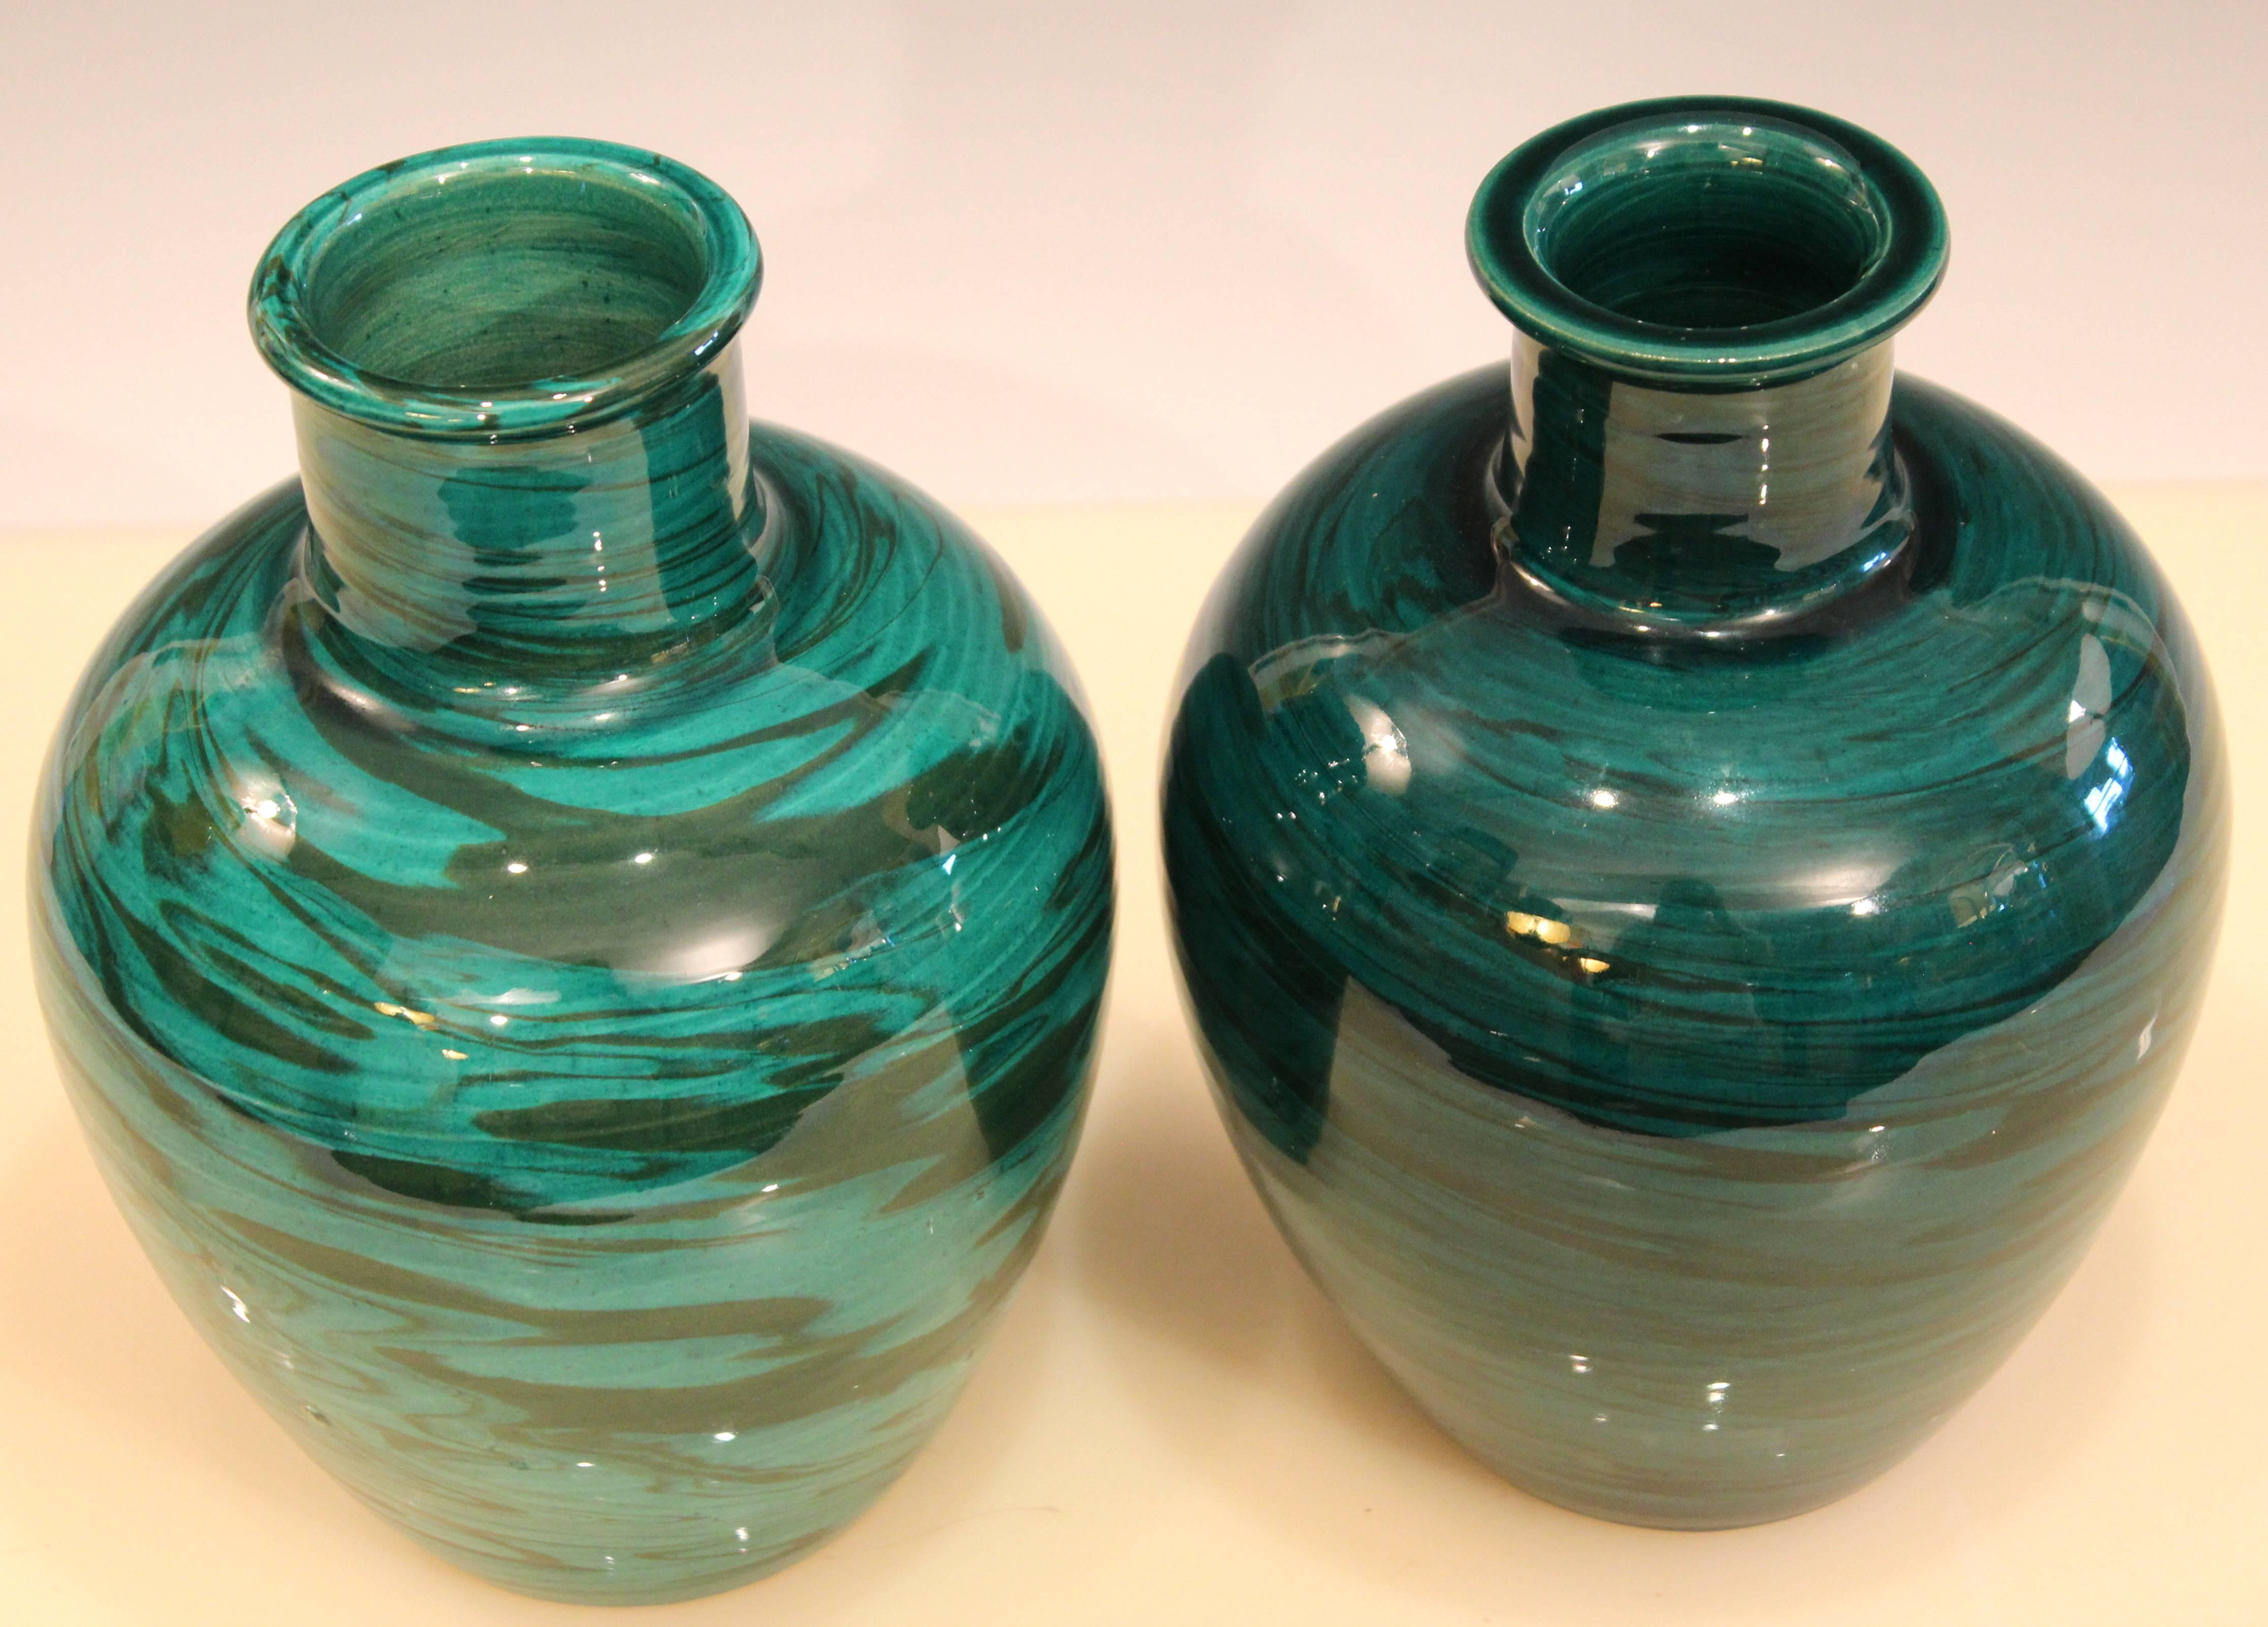 Turned Bitossi MCM Raymor Vintage Italian Pottery Marbled Green Marbleized Vases, Pair For Sale